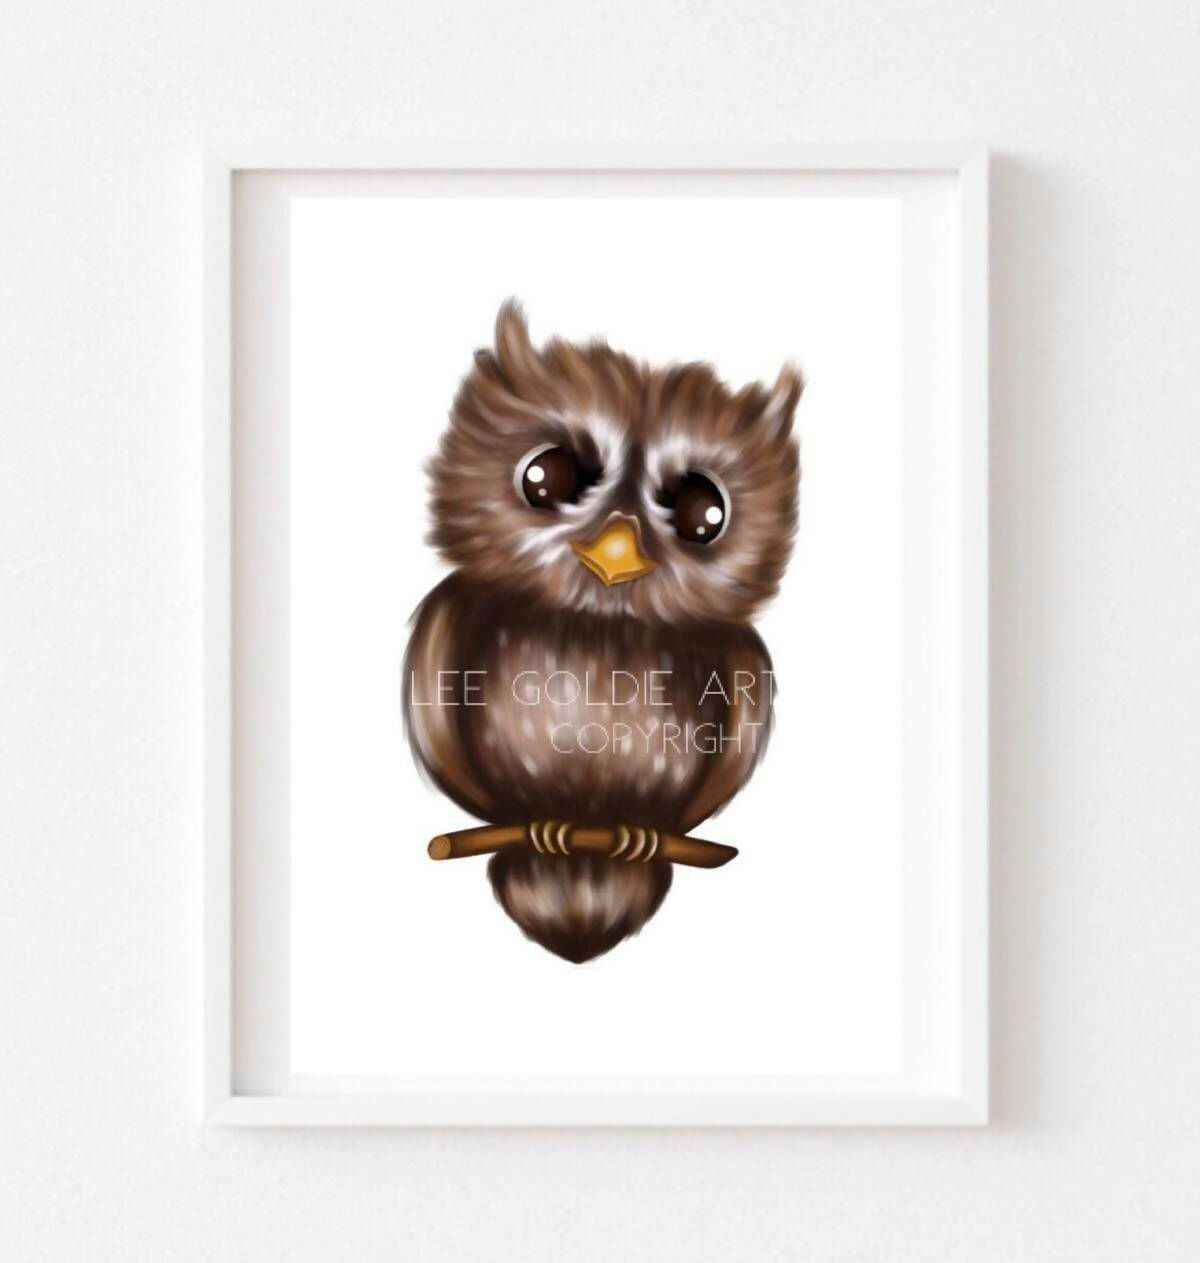 Orchard the Owl - A4 Print